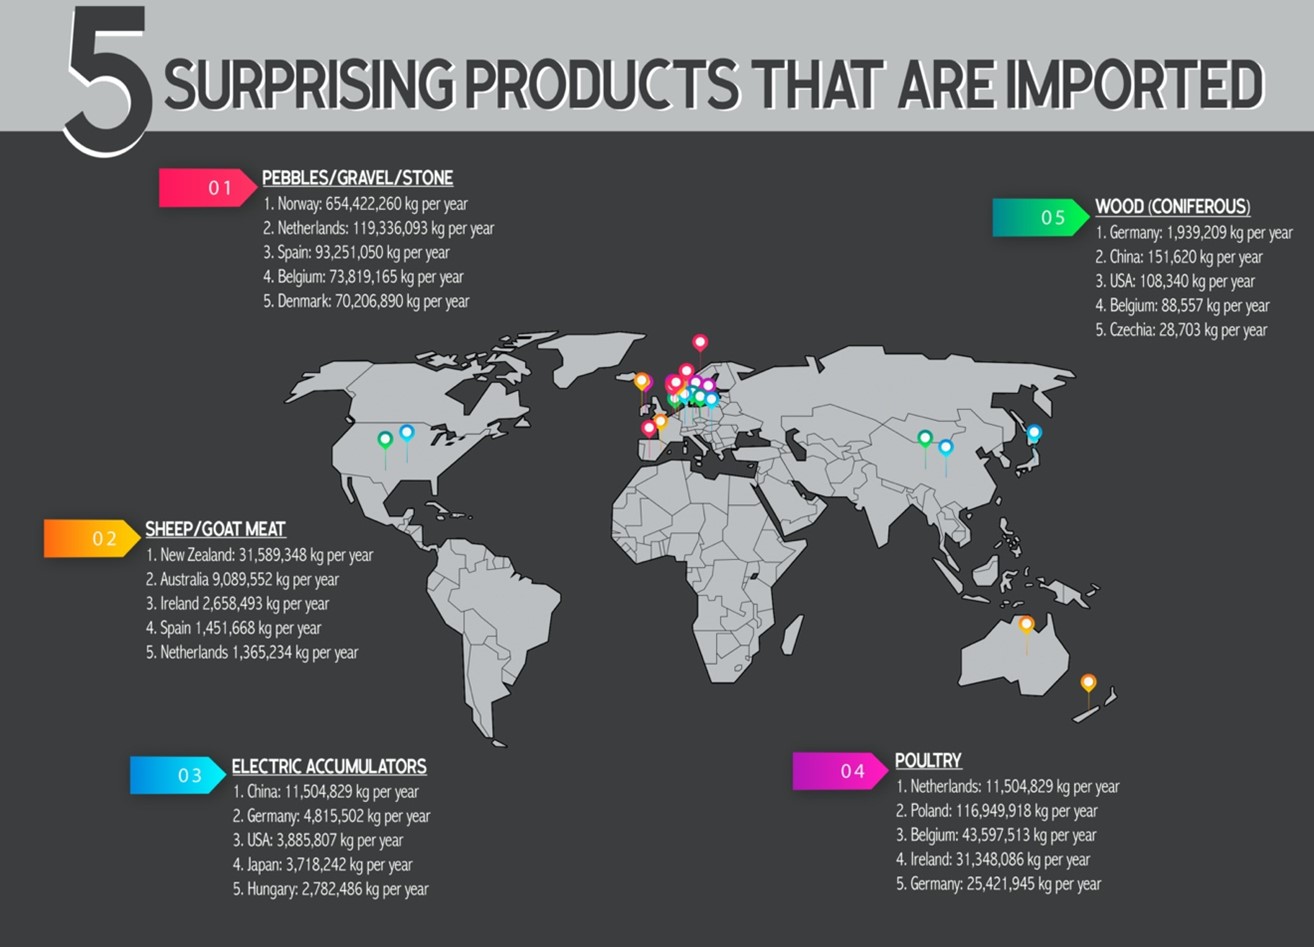 Five surprising products that are imported